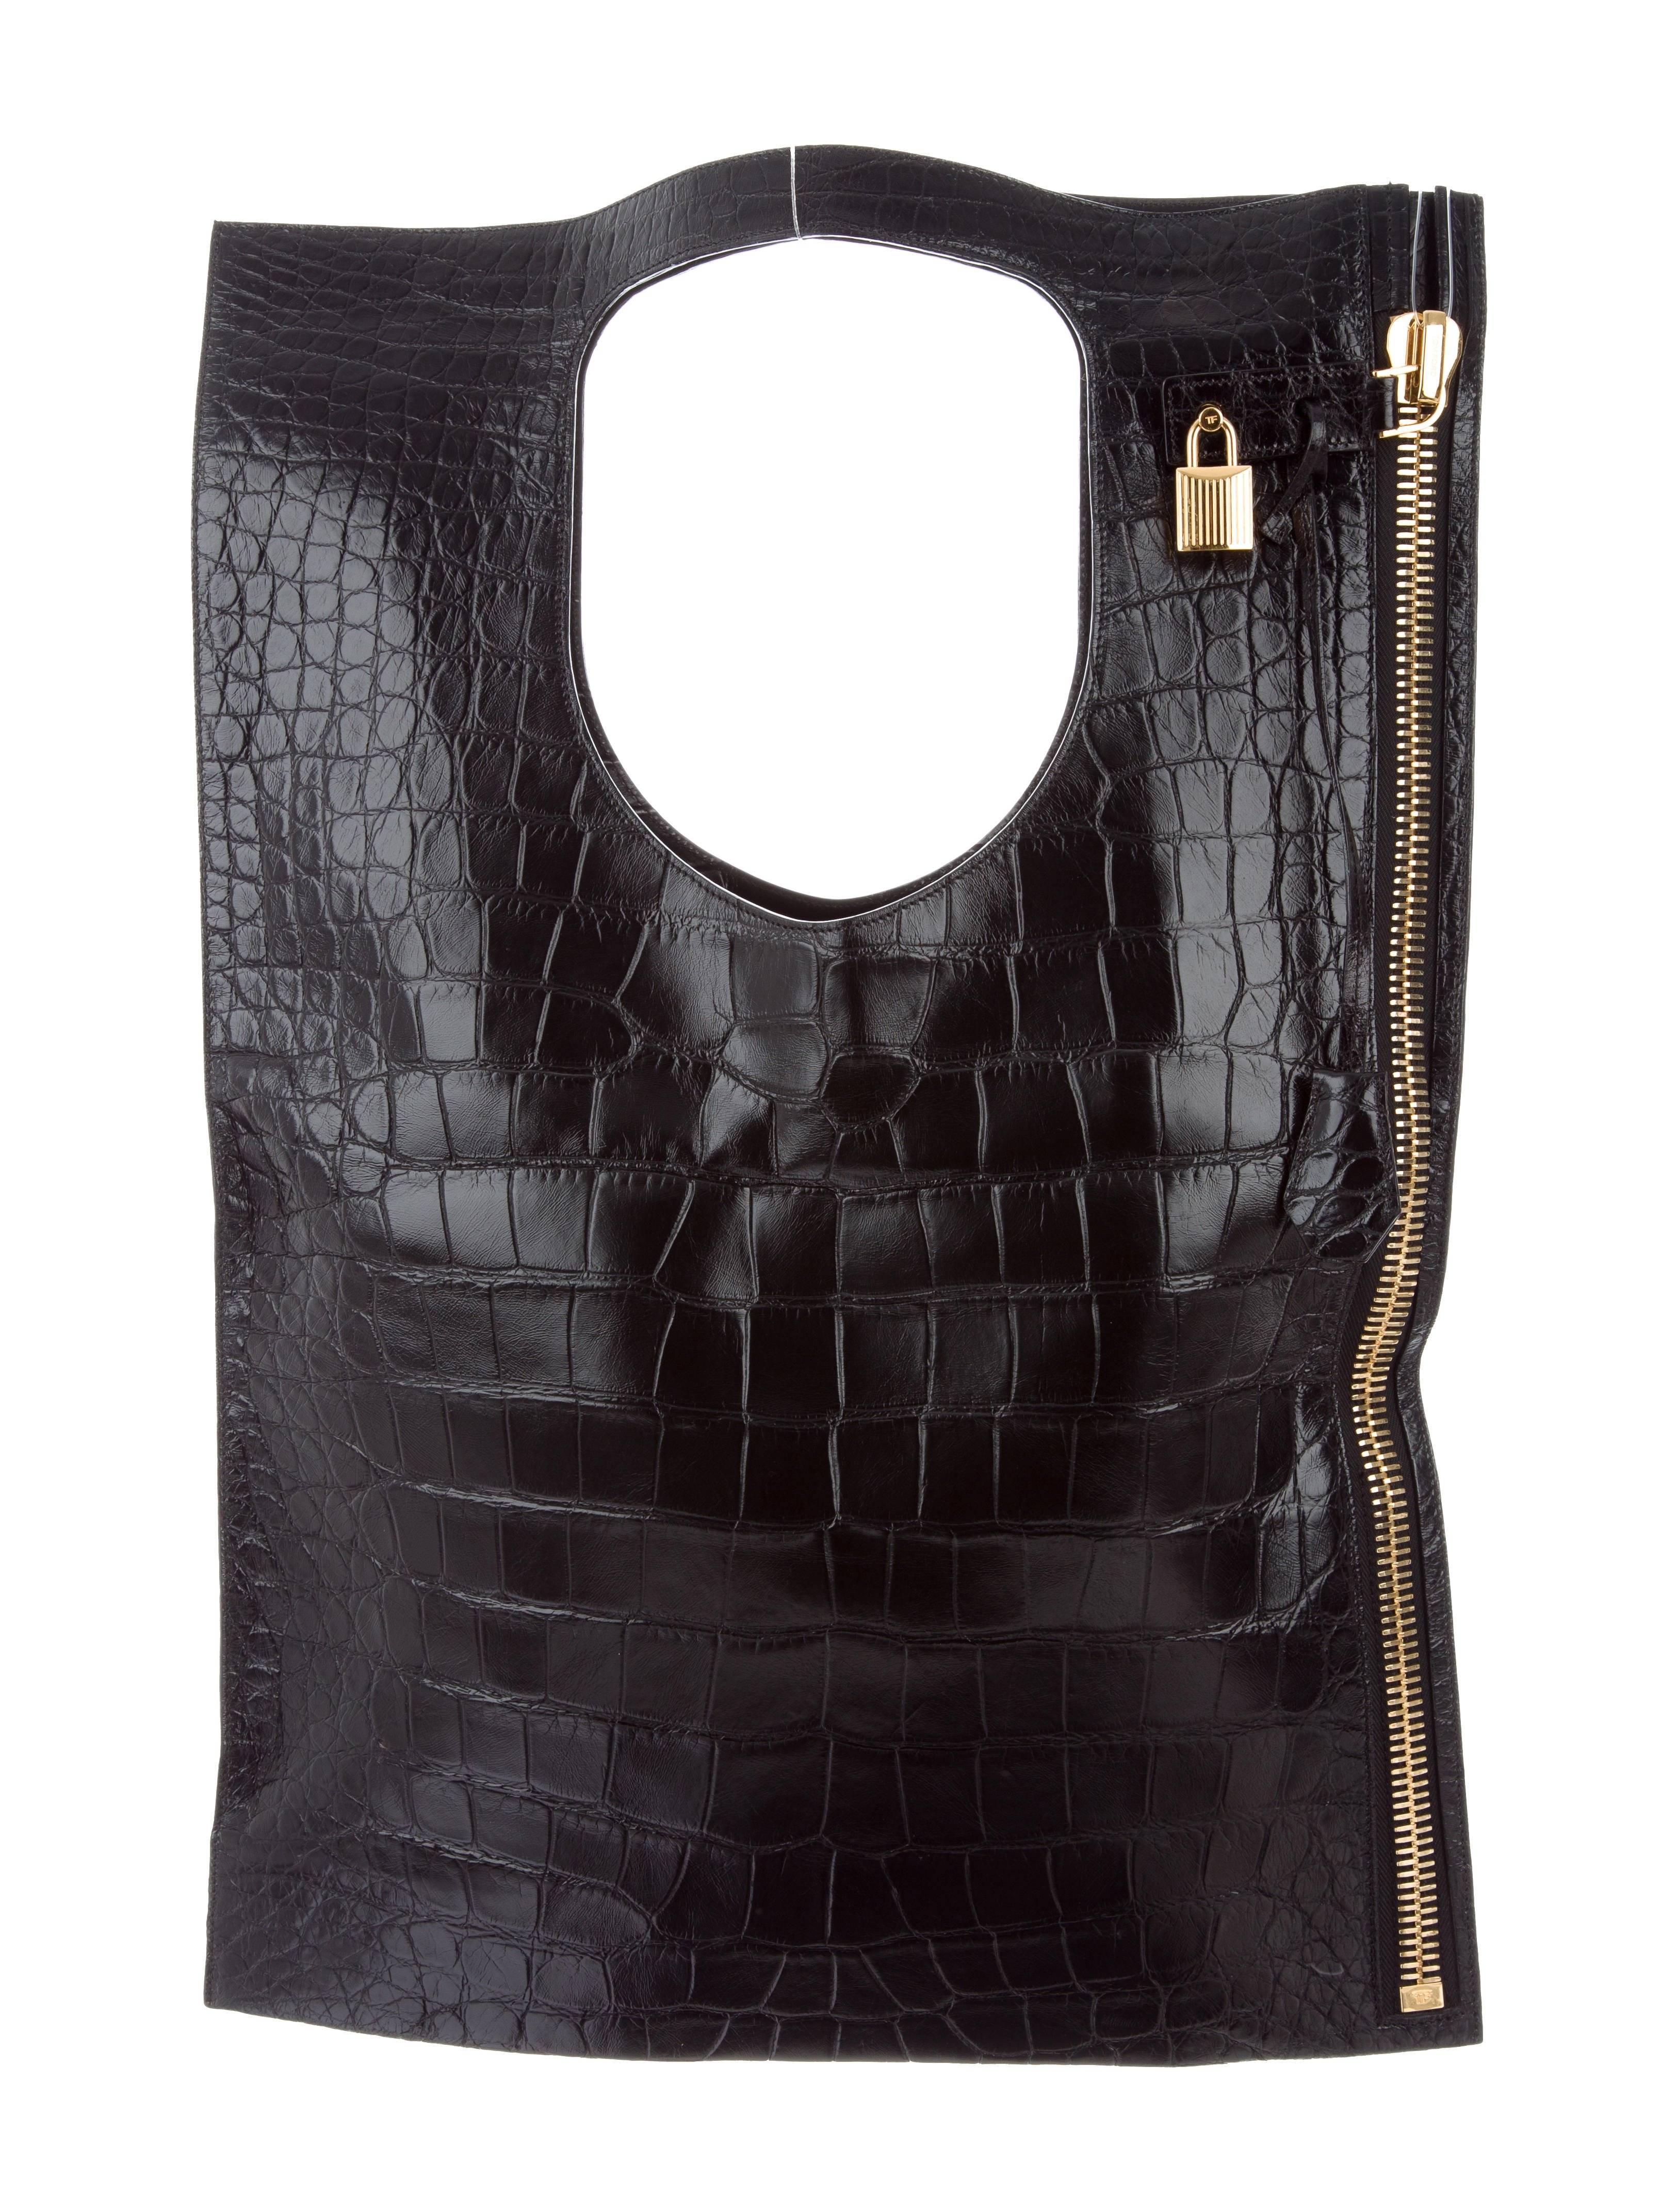 Women's Tom Ford Black Alligator Lock Fold Evening Tote Clutch Flap Bag with Accessories